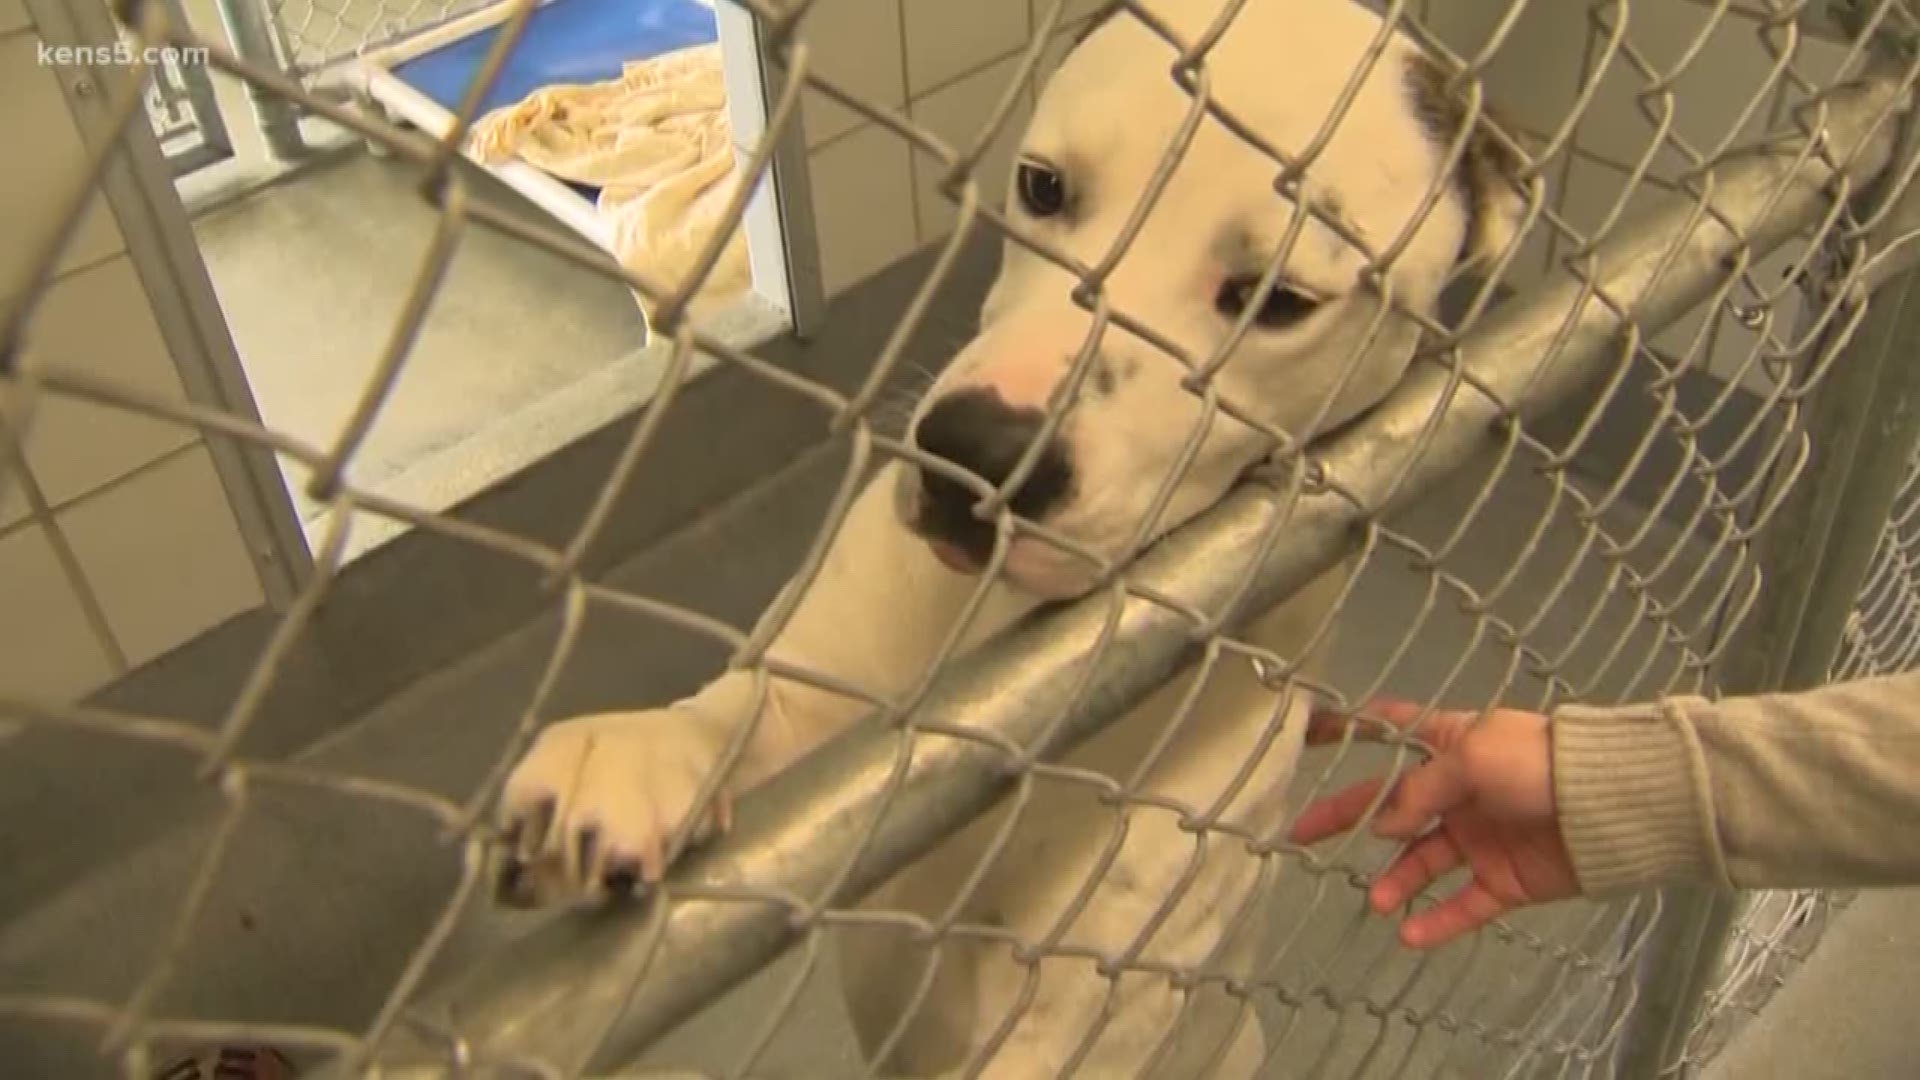 City Council just approved a program to help shelter pets and veterans. Eyewitness News reporter Erica Zucco explains.